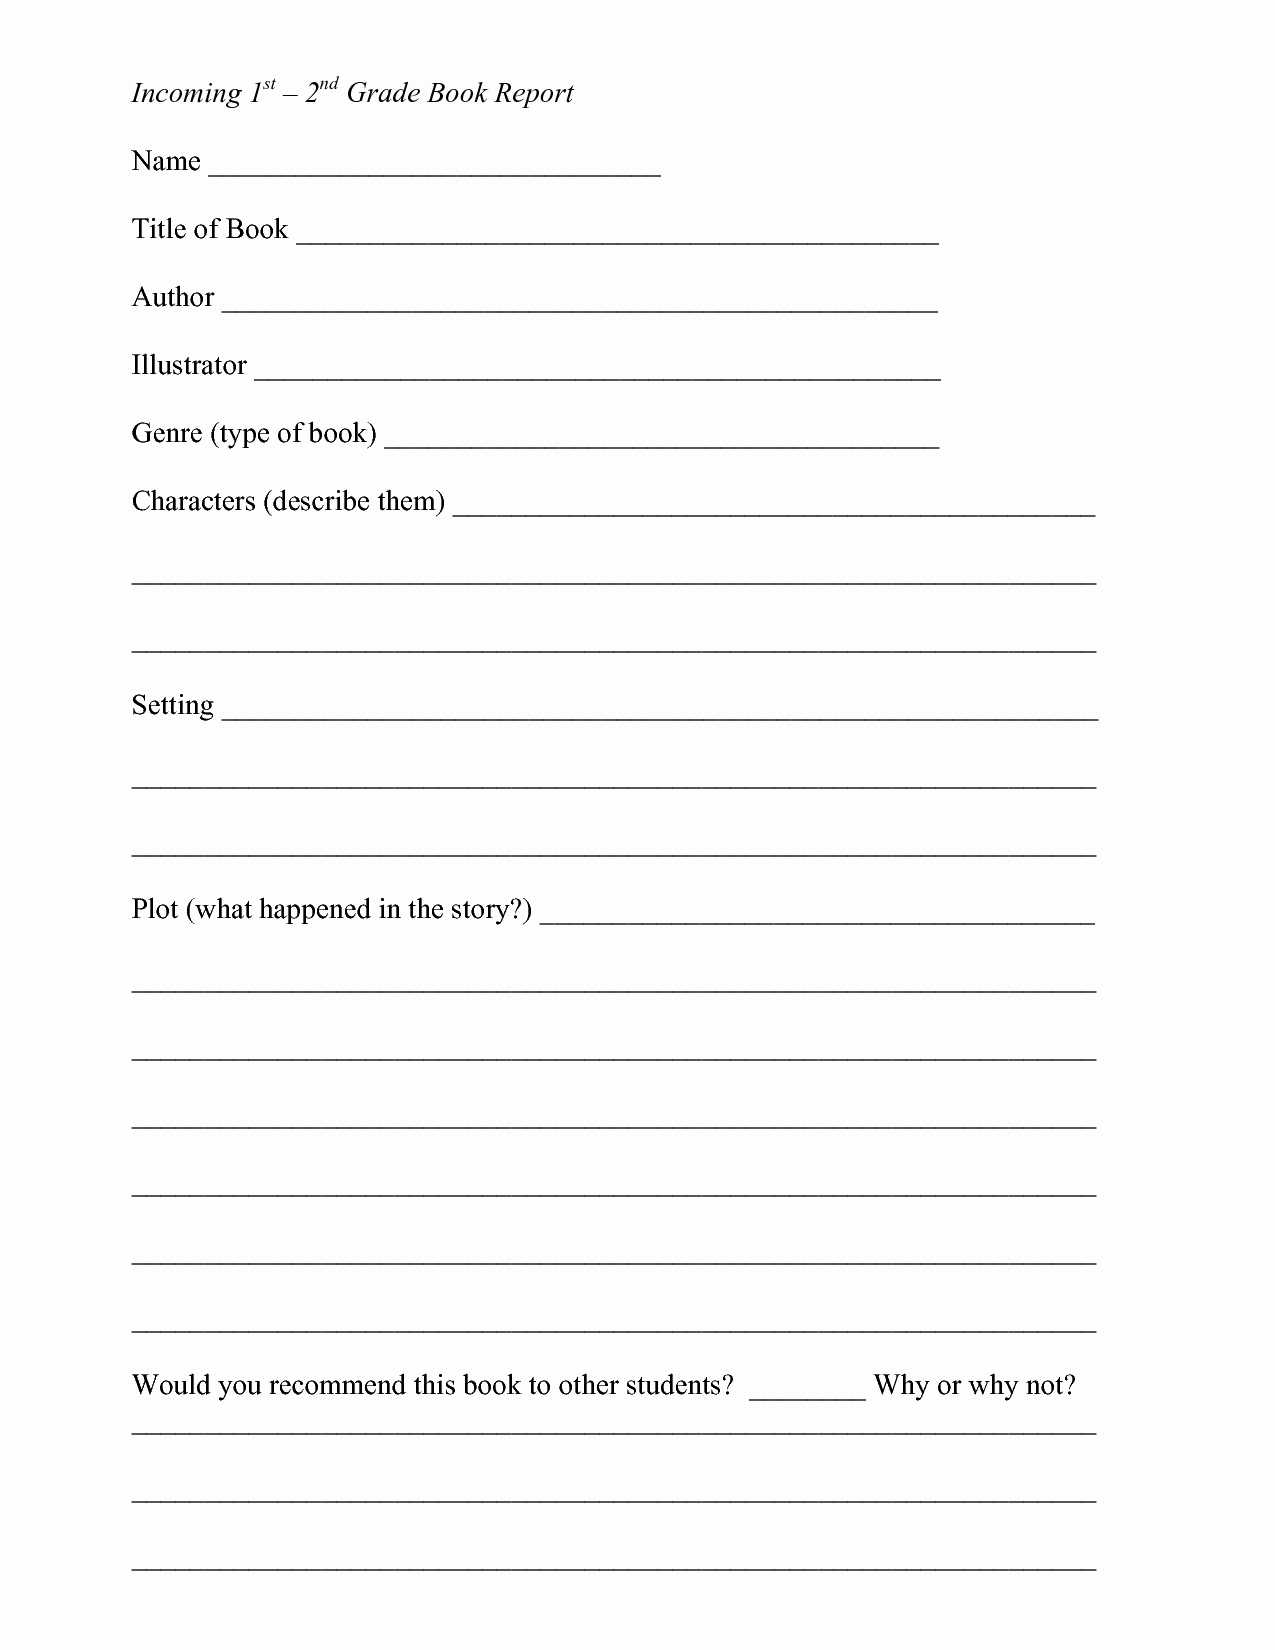 Fiction Book Report Template 6Th Grade For 7Th Graders Pdf Throughout 6Th Grade Book Report Template